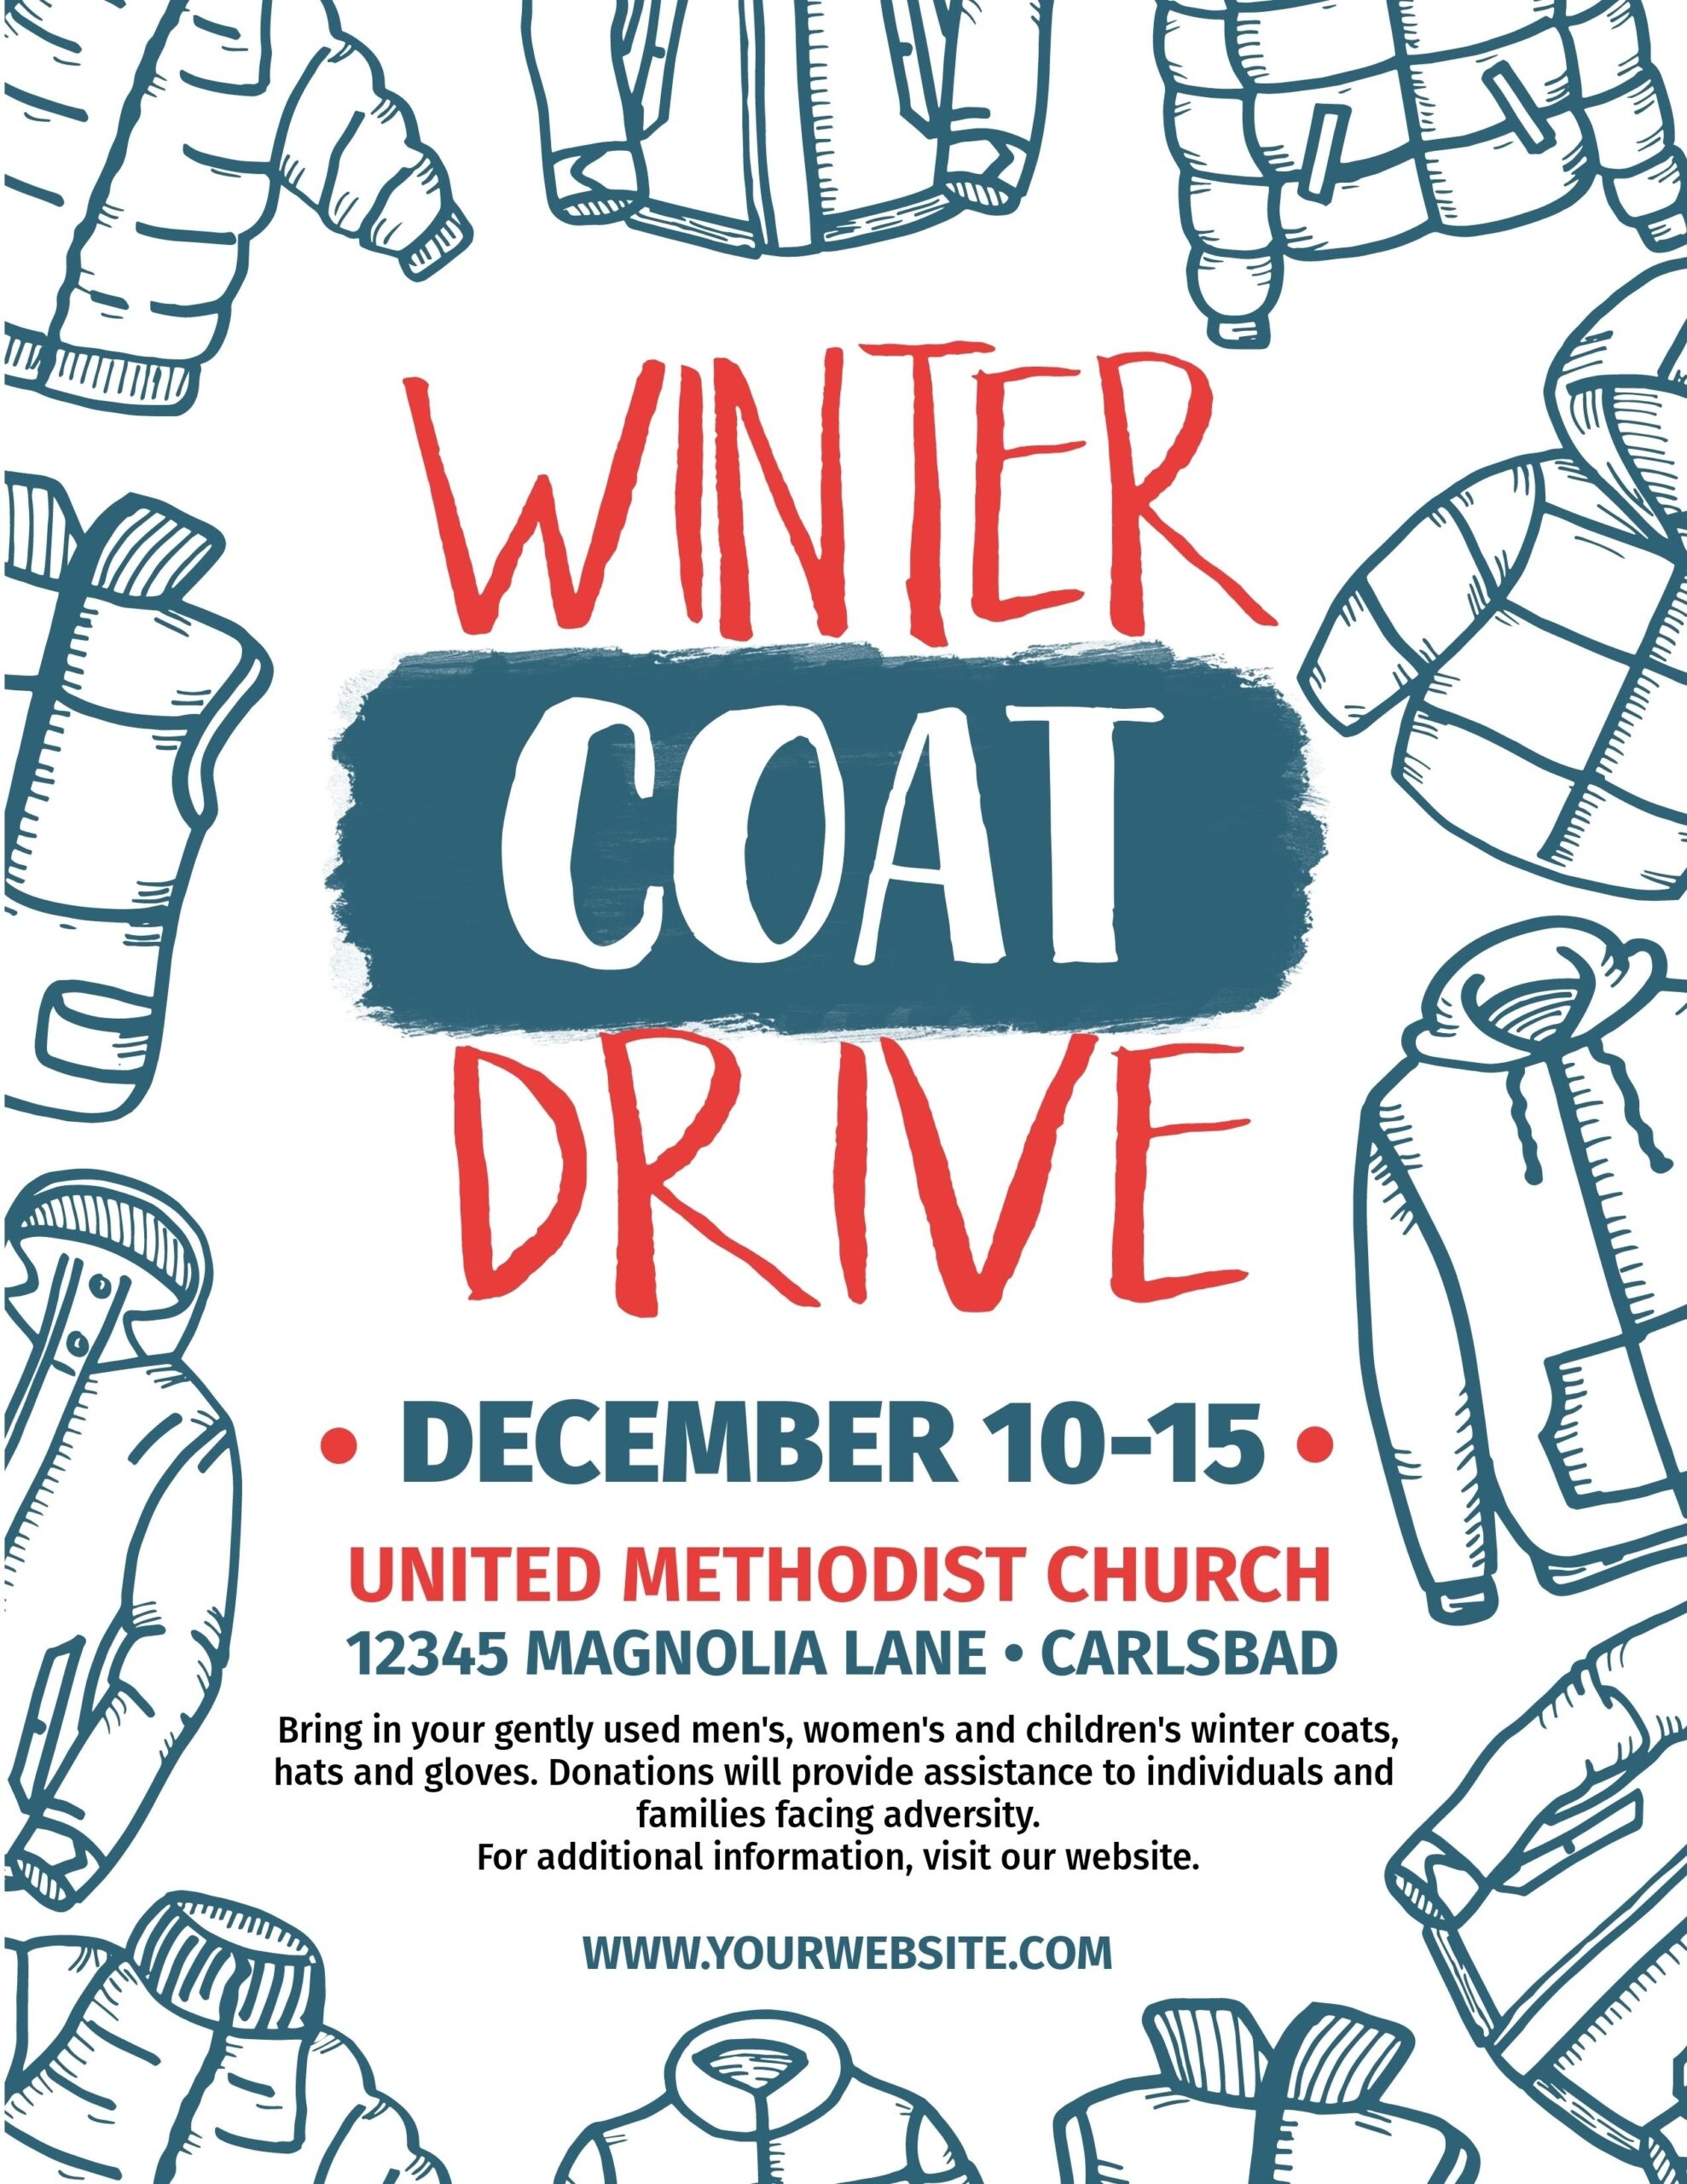 Coat Drive Template EDITABLE Winter Coat Drive Flyer Etsy Coat Drive Drive Poster Service Projects For Kids